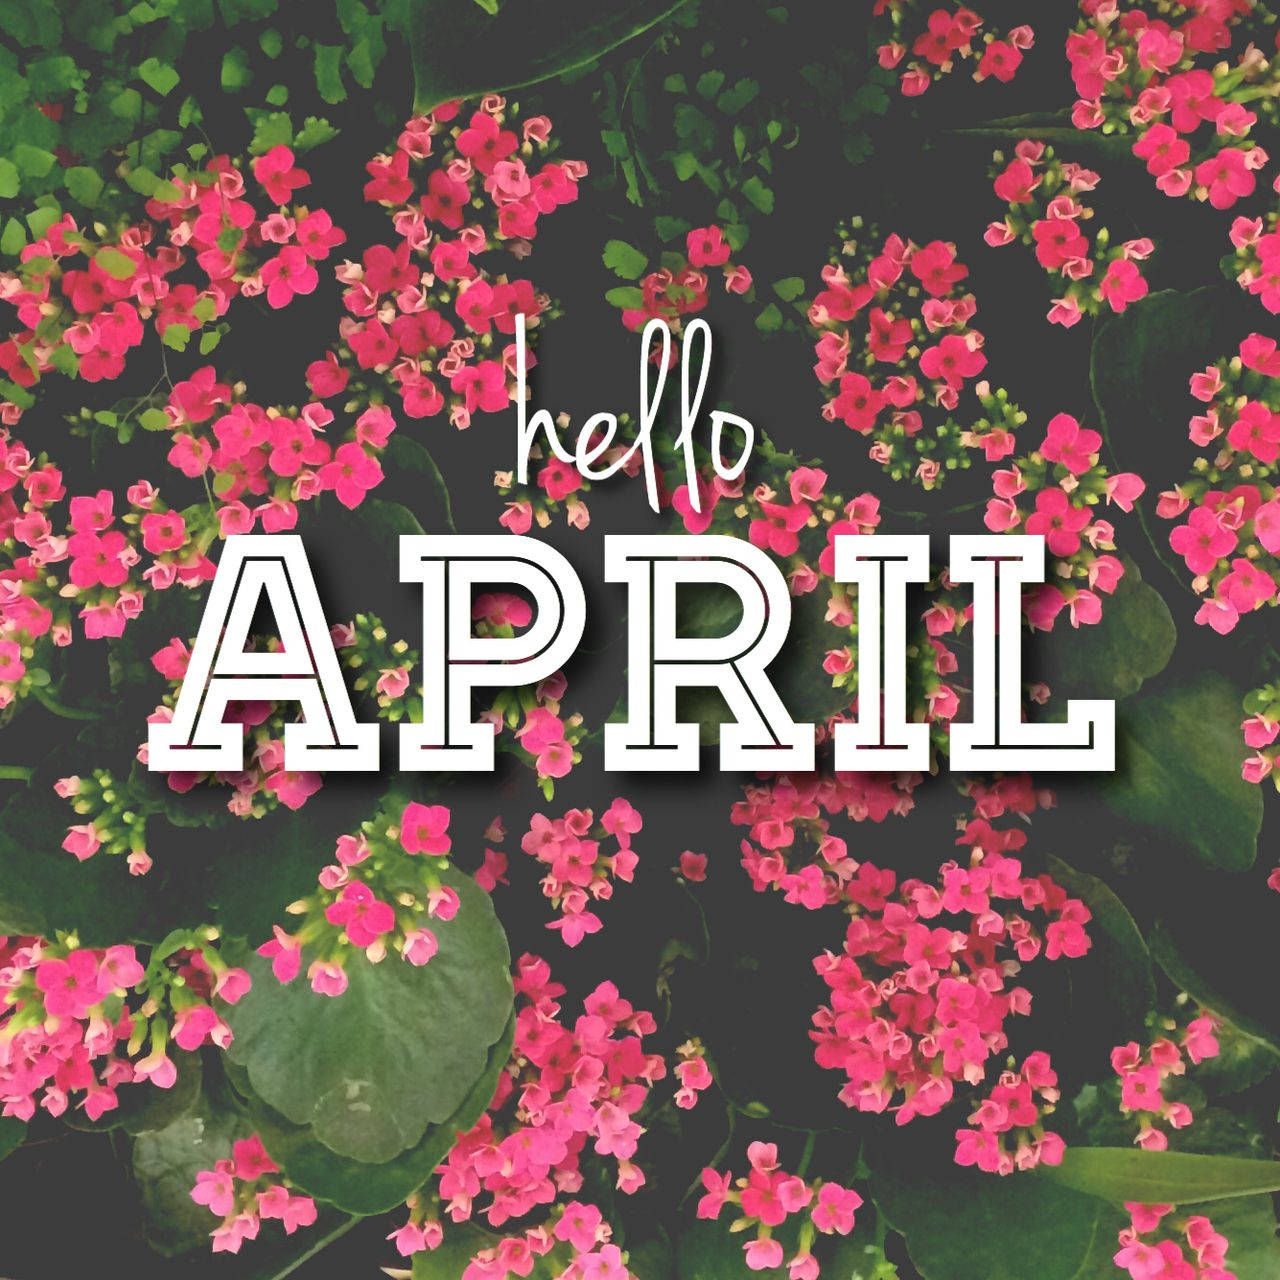 April 1280X1280 Wallpaper and Background Image